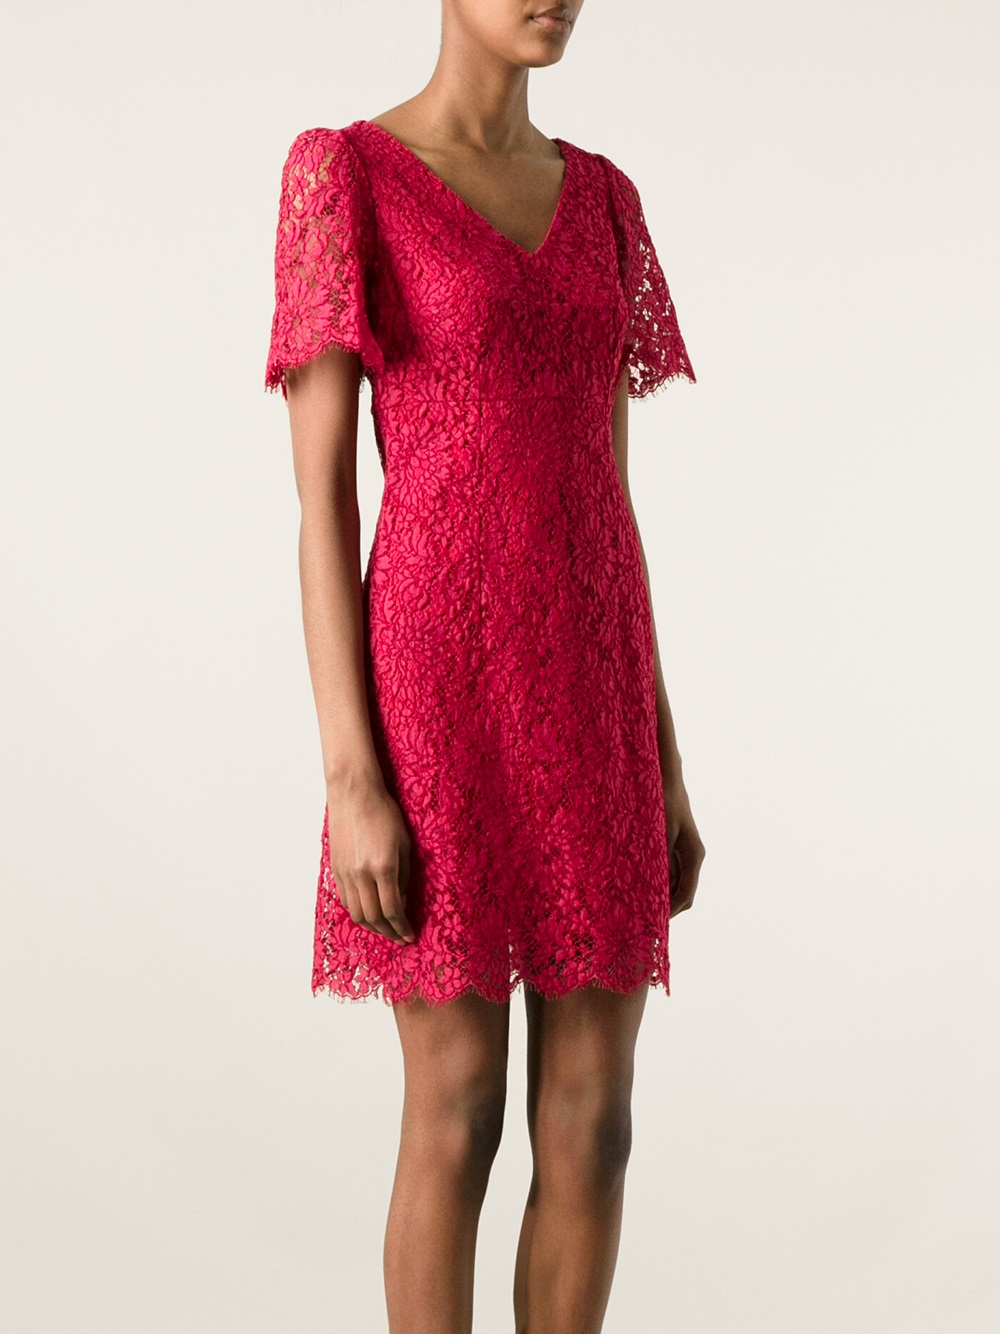 Lyst - Dolce & Gabbana Lace Dress in Red